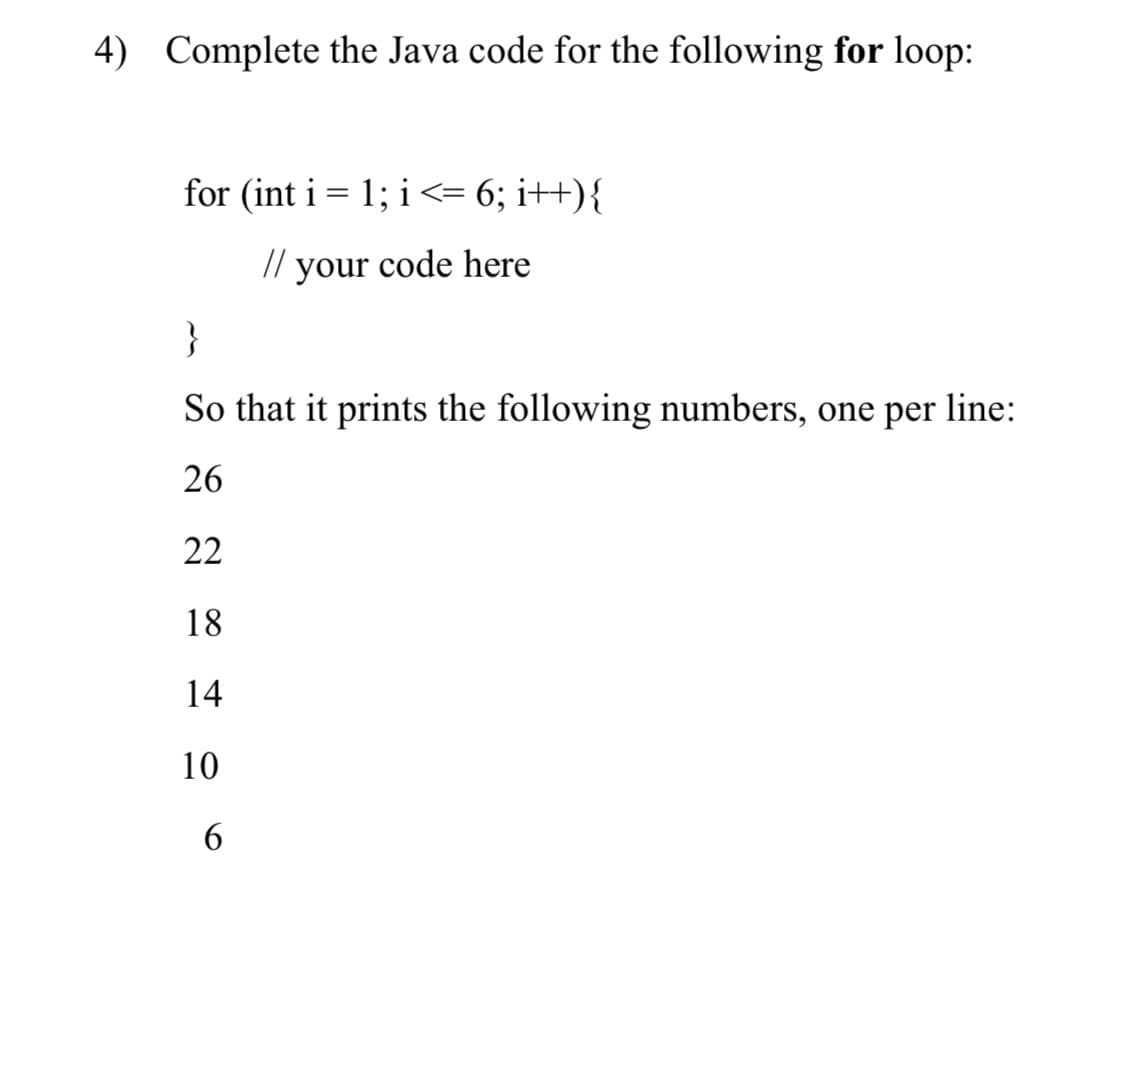 4) Complete the Java code for the following for loop:
for (int i = 1; i <= 6; i++){
//
your
code here
}
So that it prints the following numbers, one per line:
26
22
18
14
10
